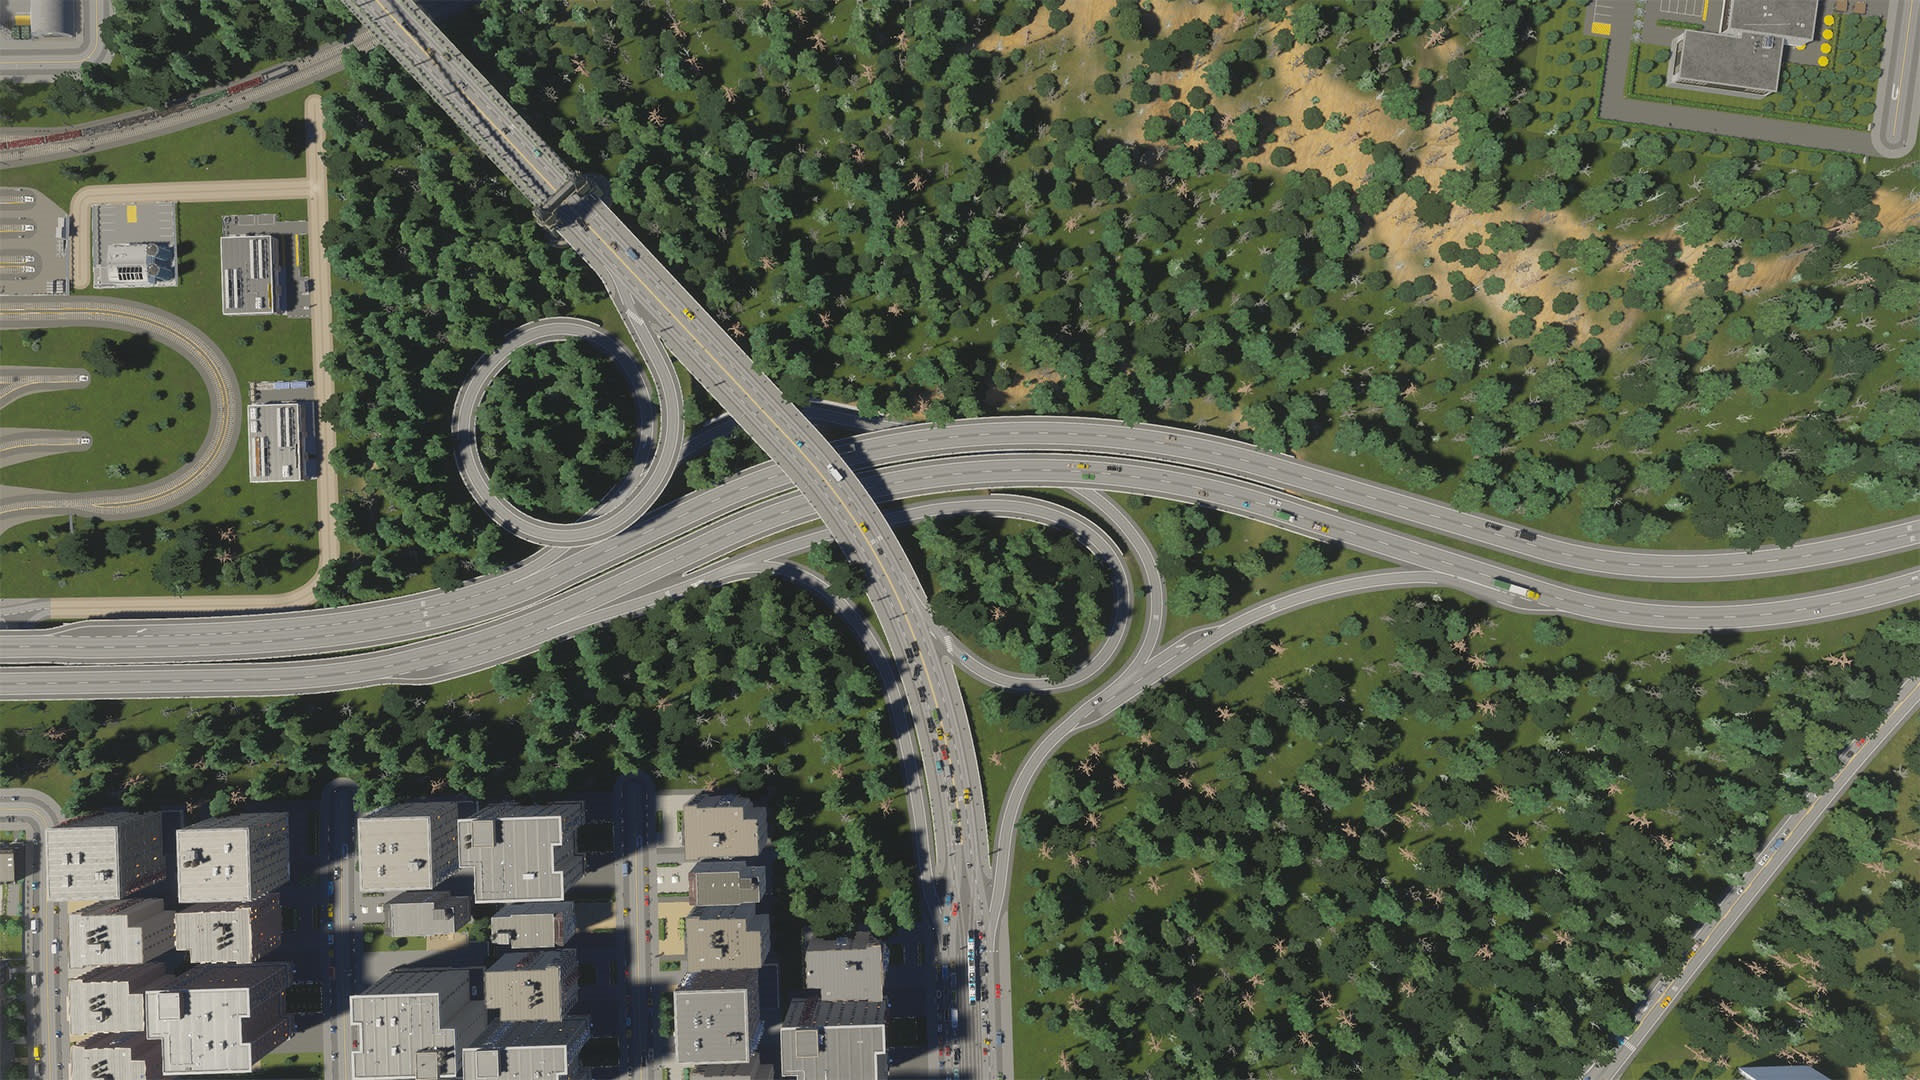 Cities Skylines 2 road guide